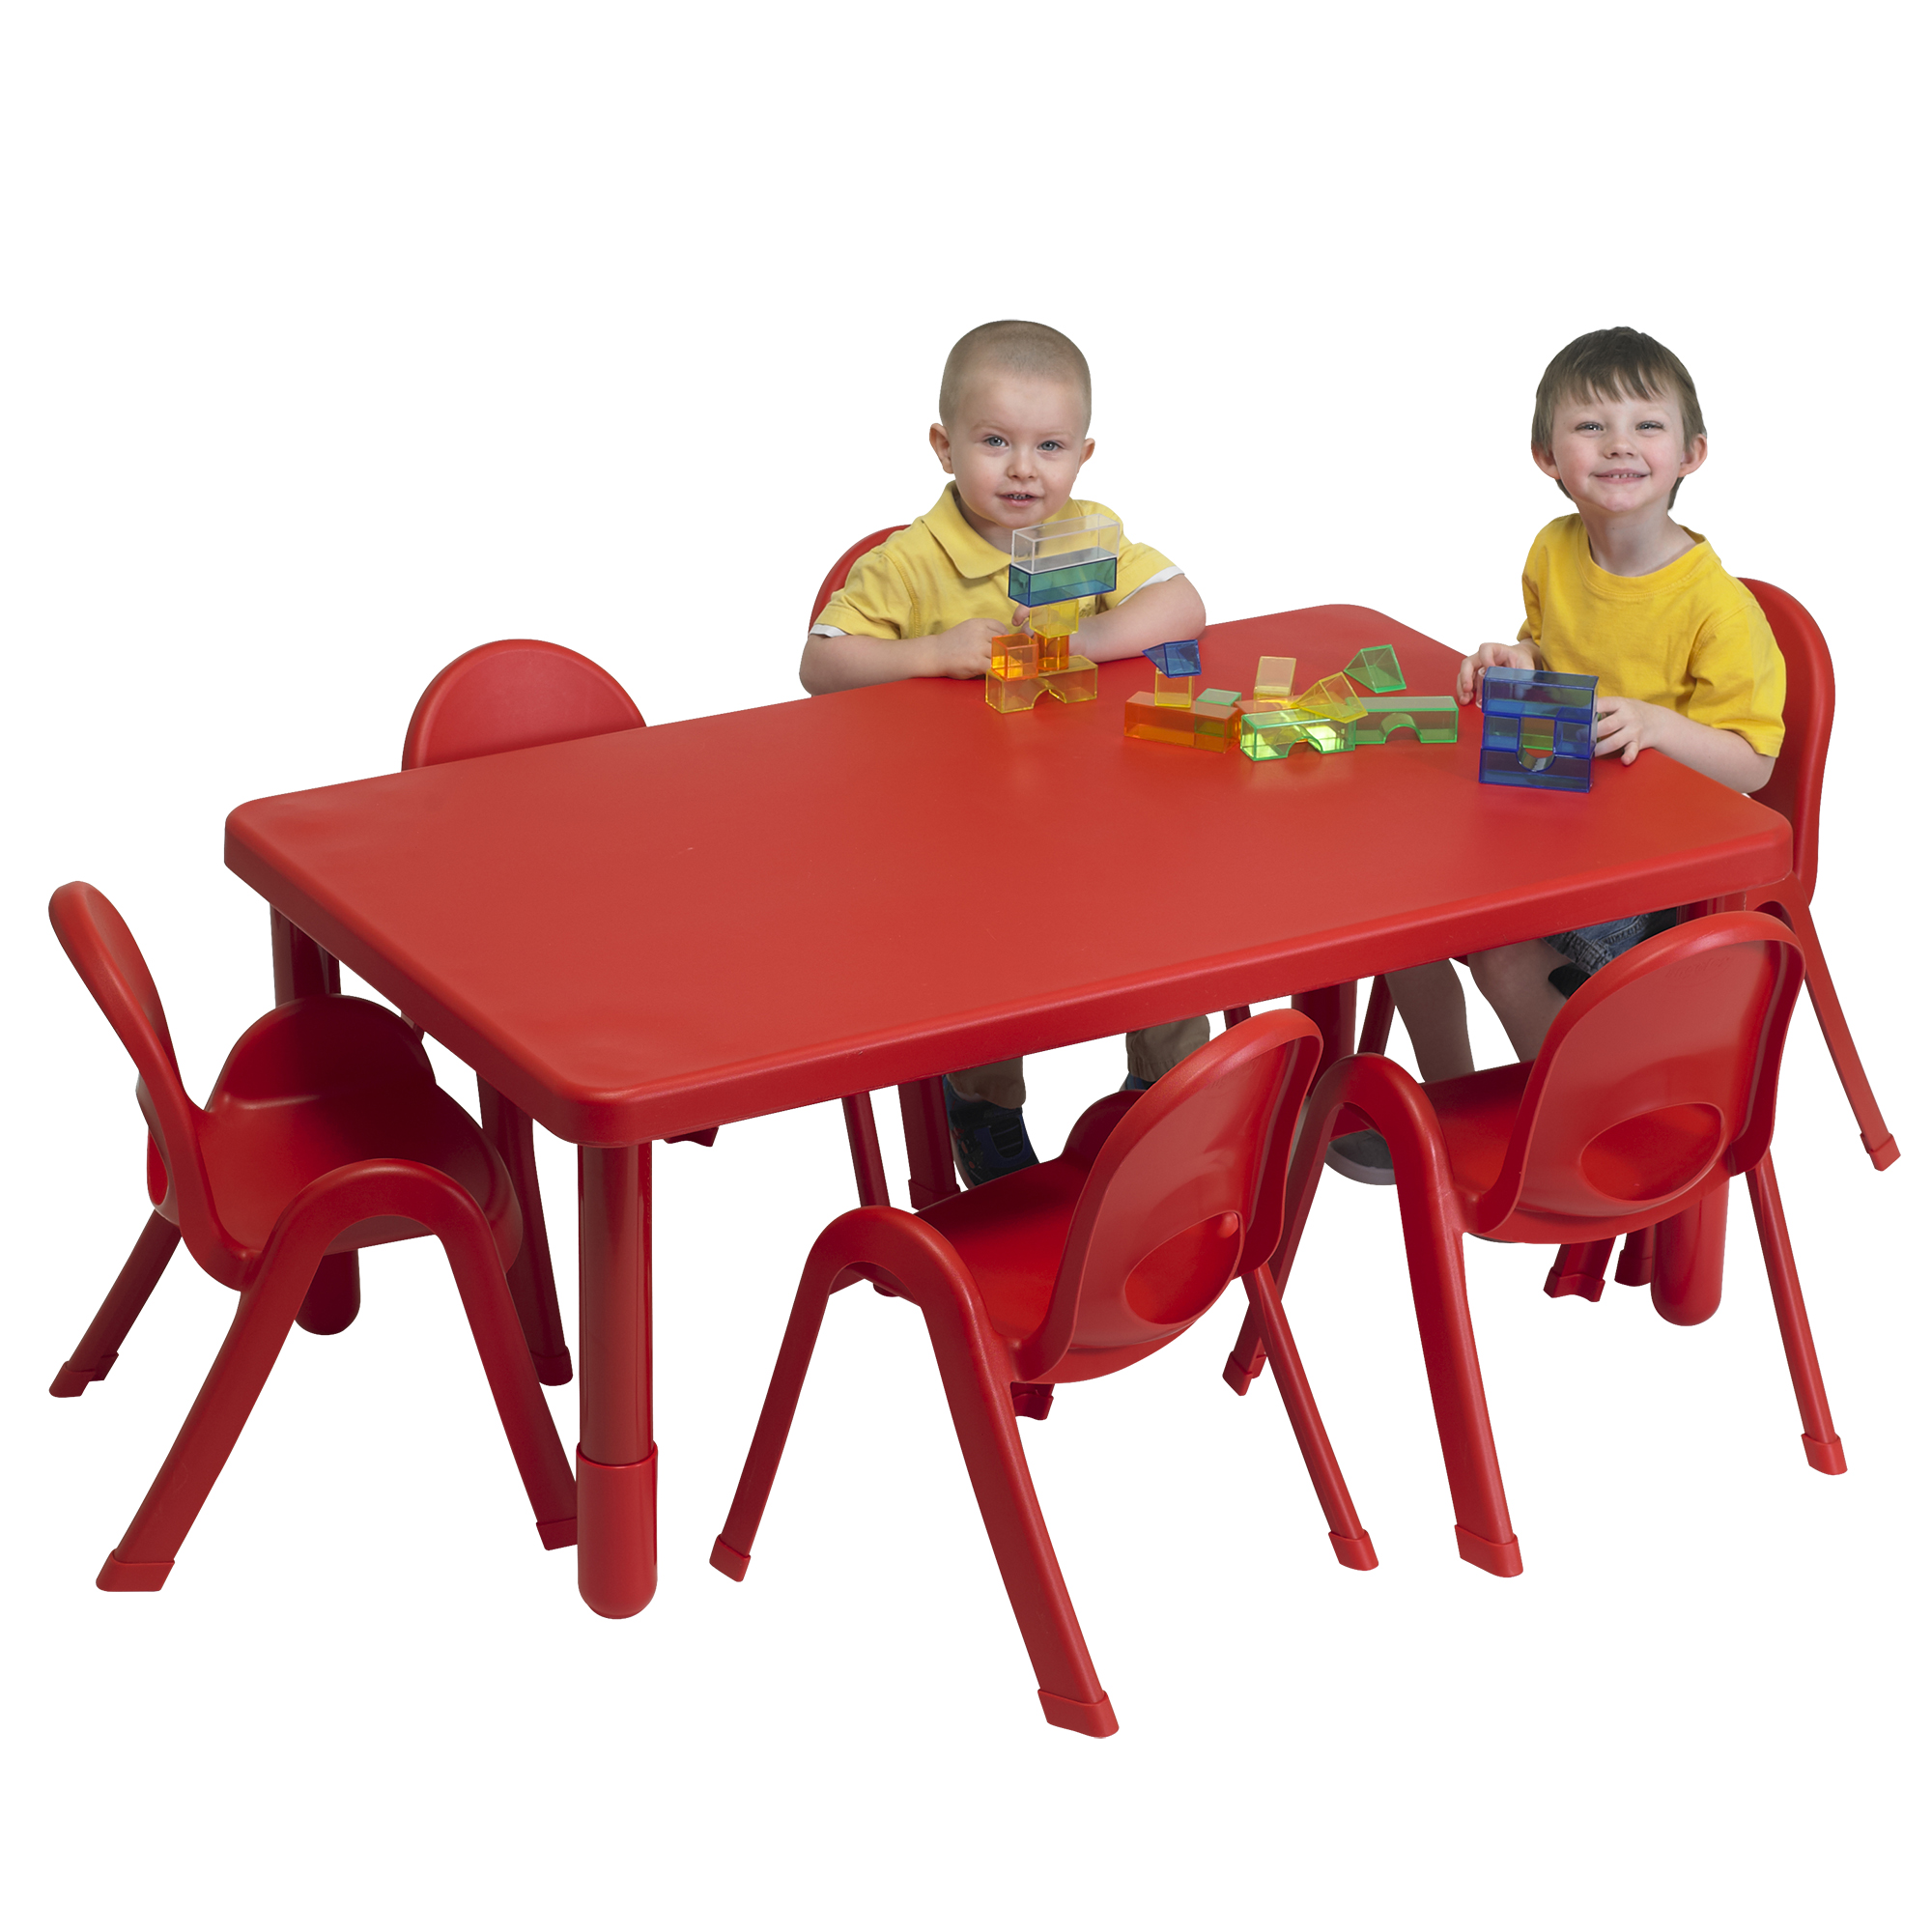 MyValue™ Preschool Set 6 Rectangle - Candy Apple Red